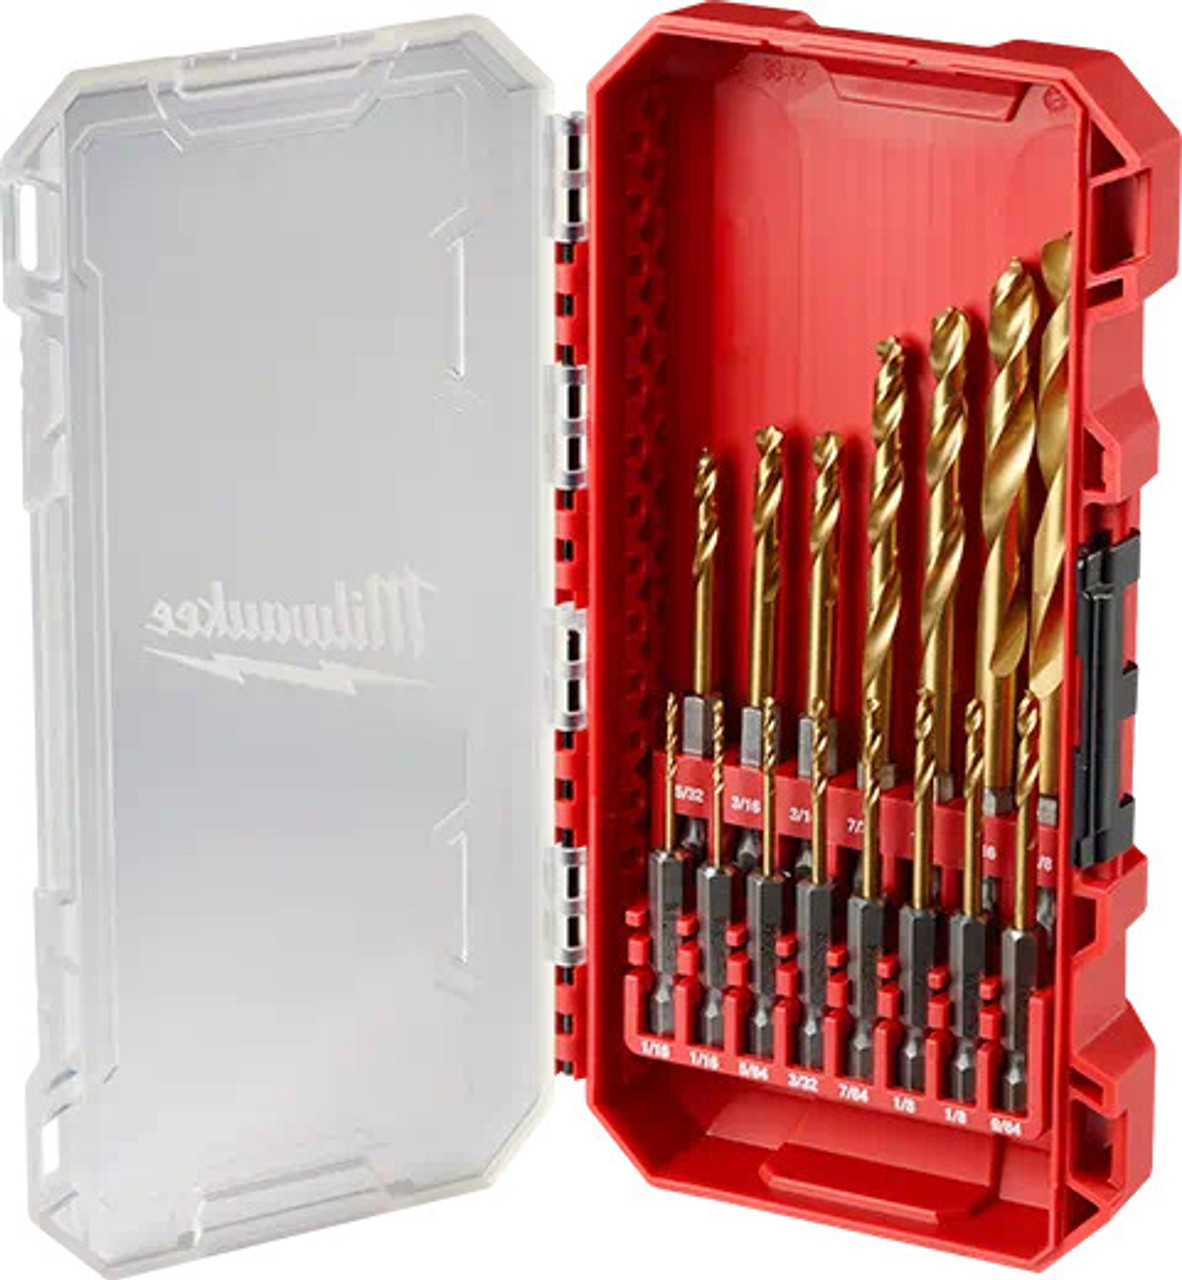 Milwaukee 48894670 SHOCKWAVE Impact Duty RED HELIX Titanium Drill Bit Set -  15PC - Industrial Safety Products